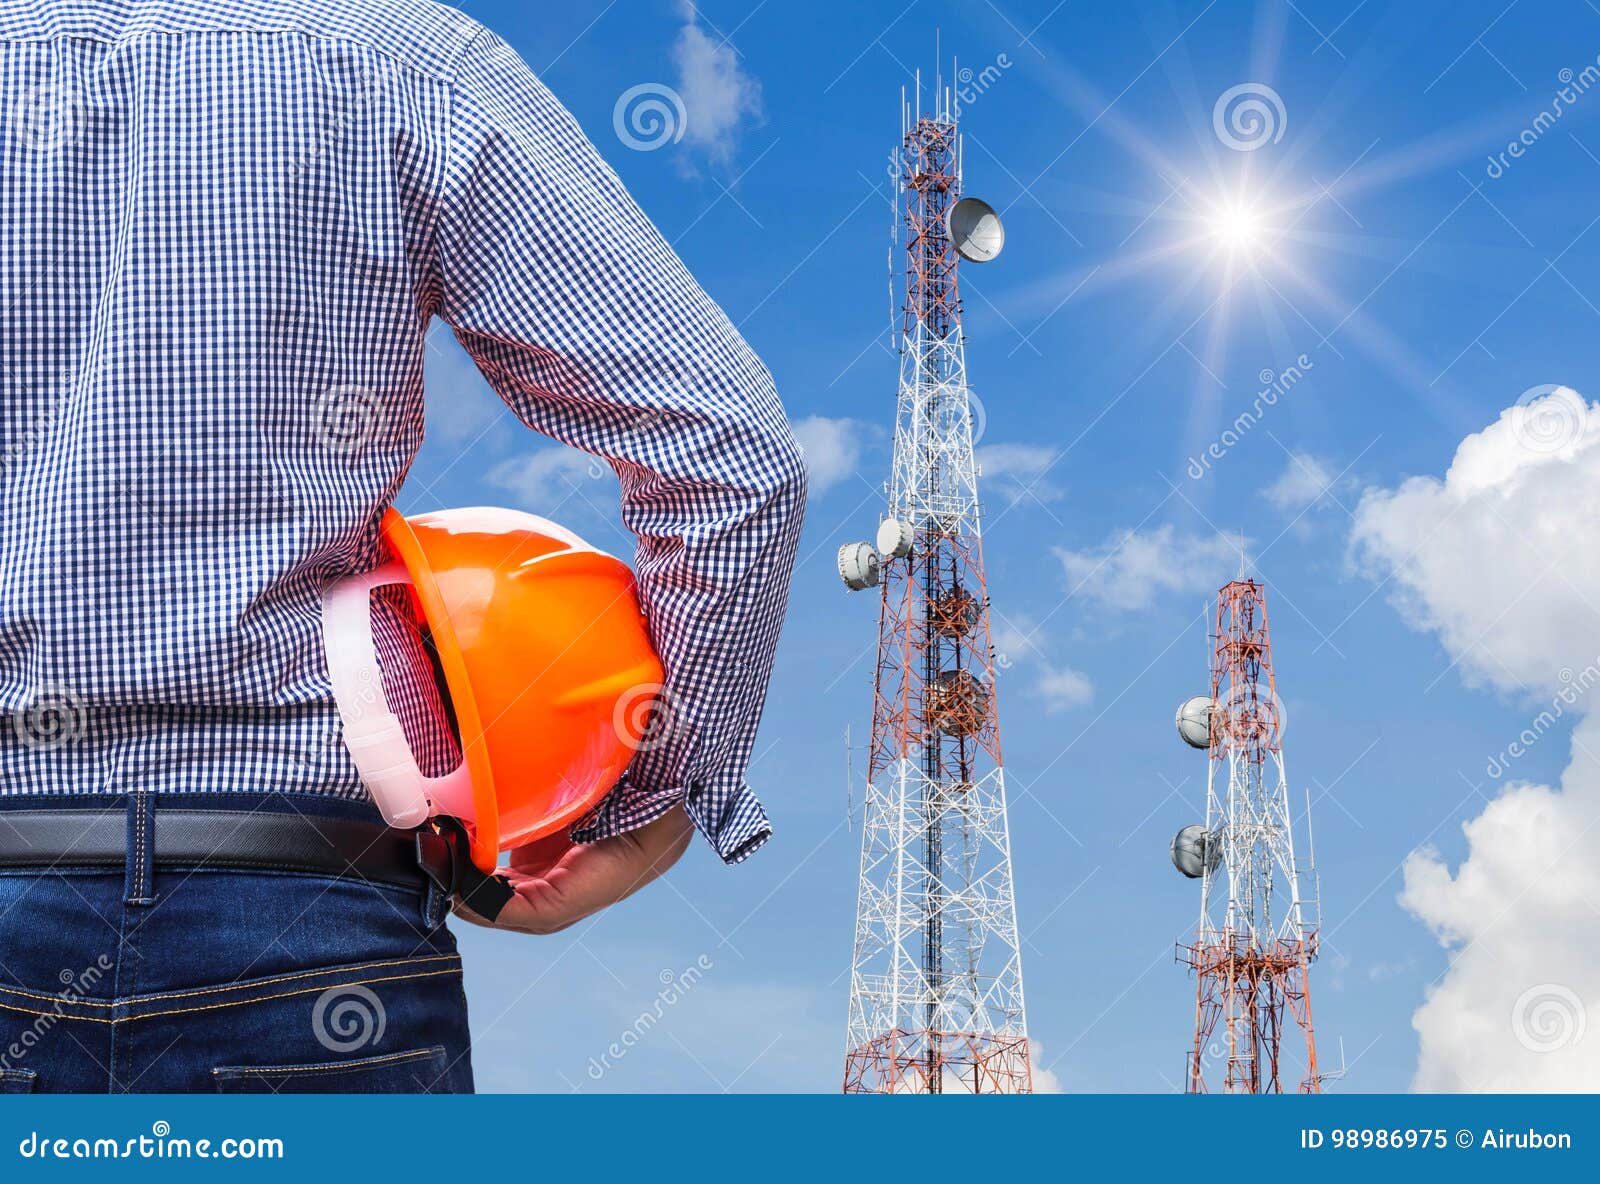 engineer holding safety helmet with telecommunication tower pillars